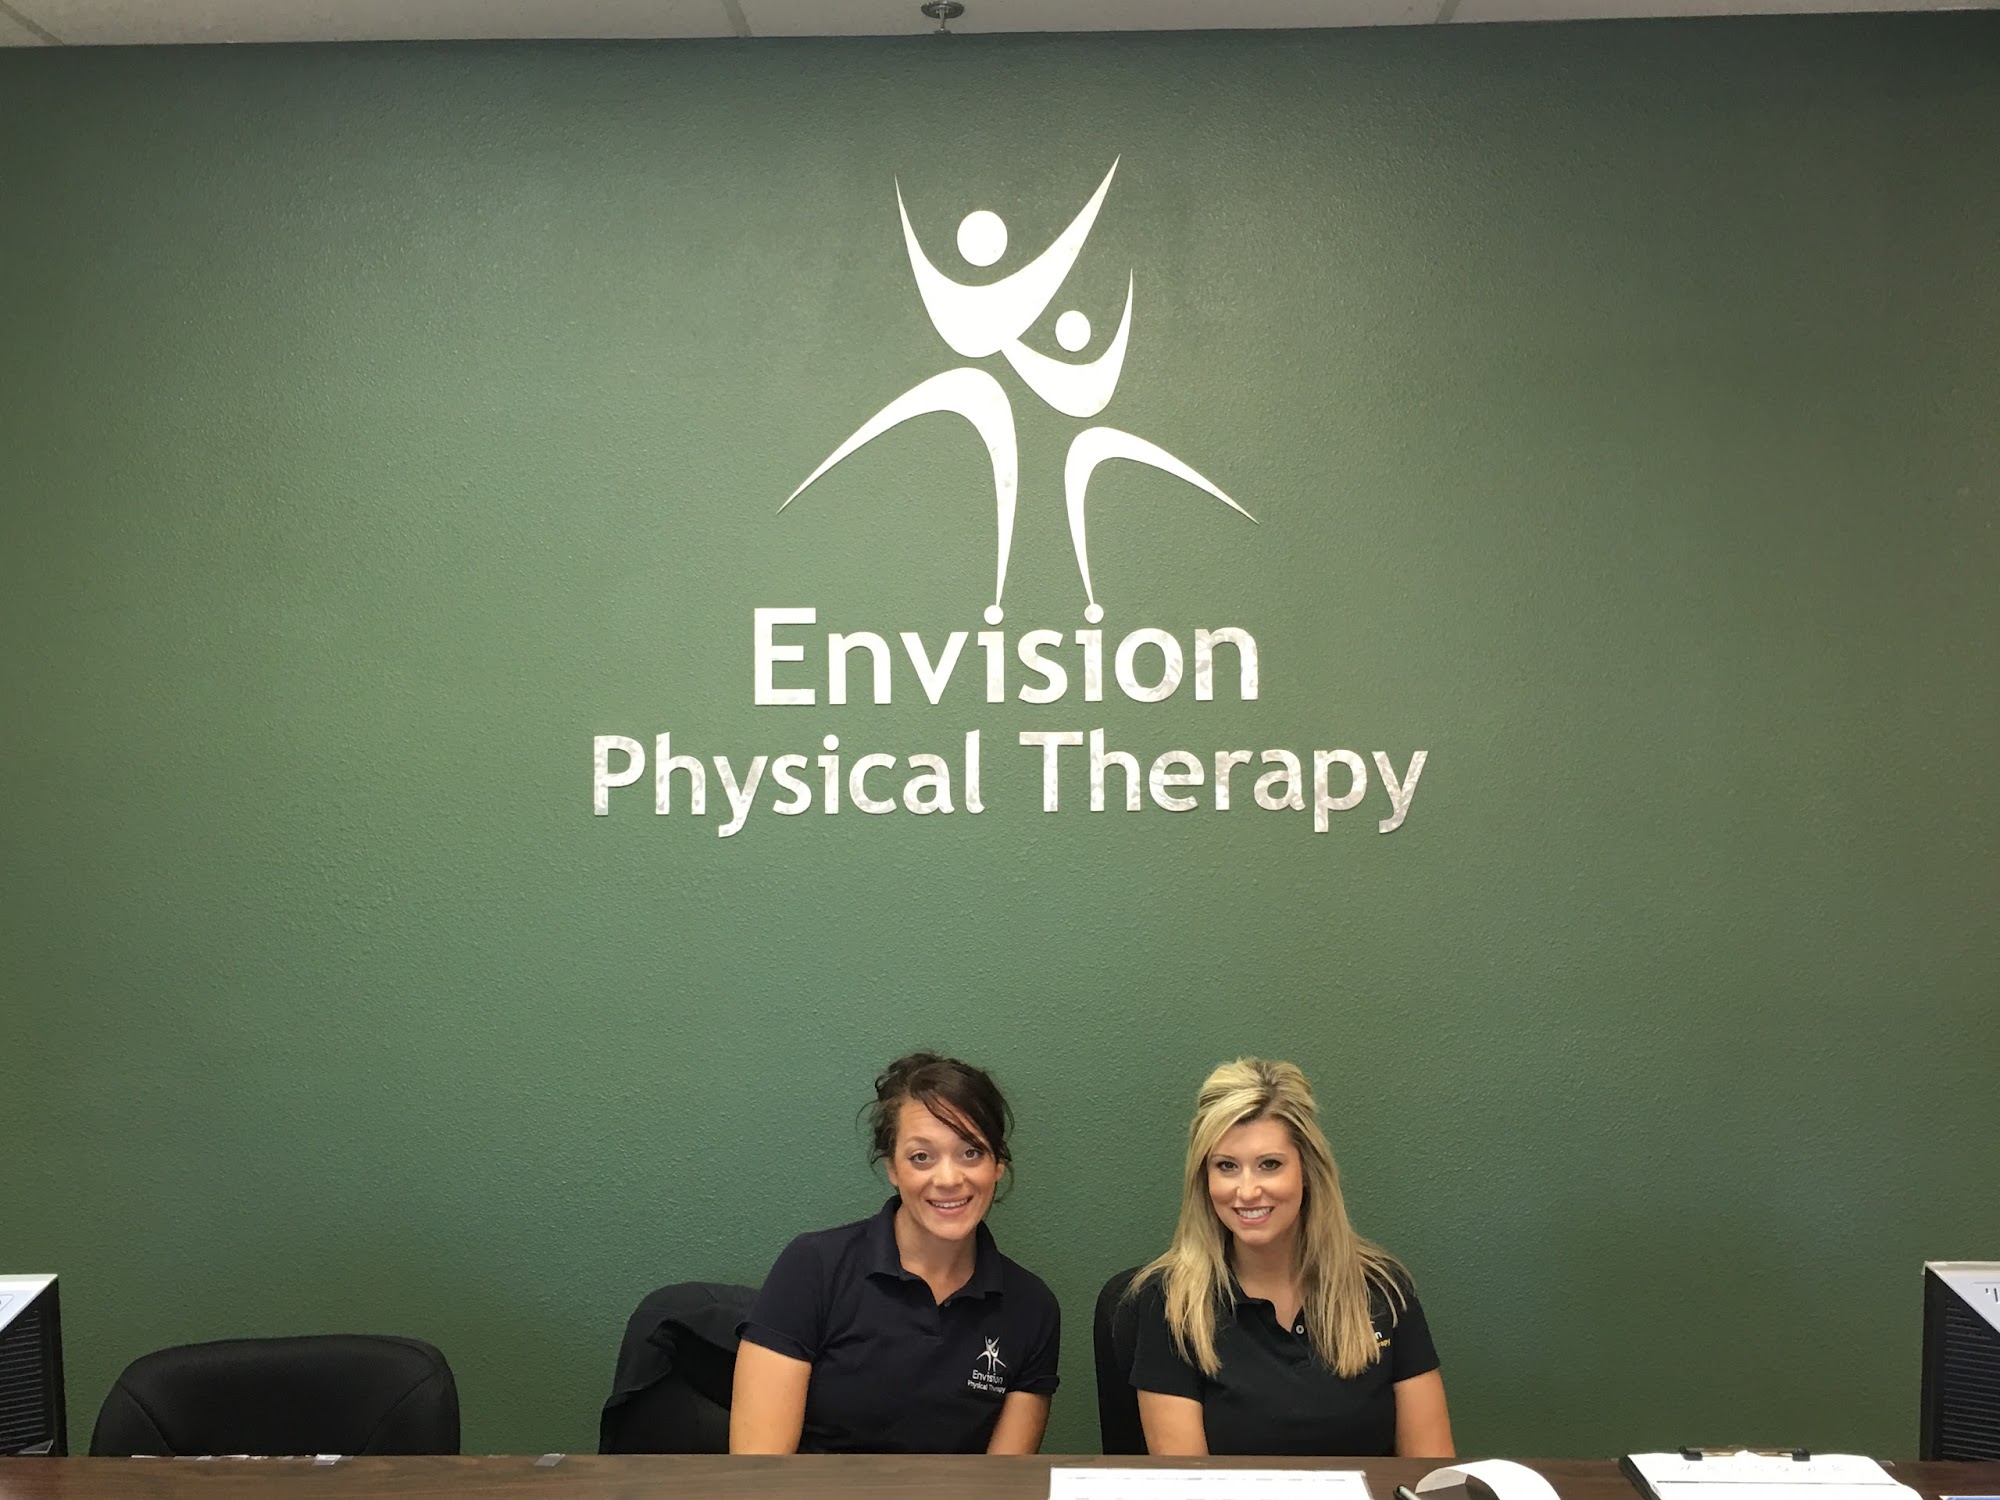 Envision Physical Therapy